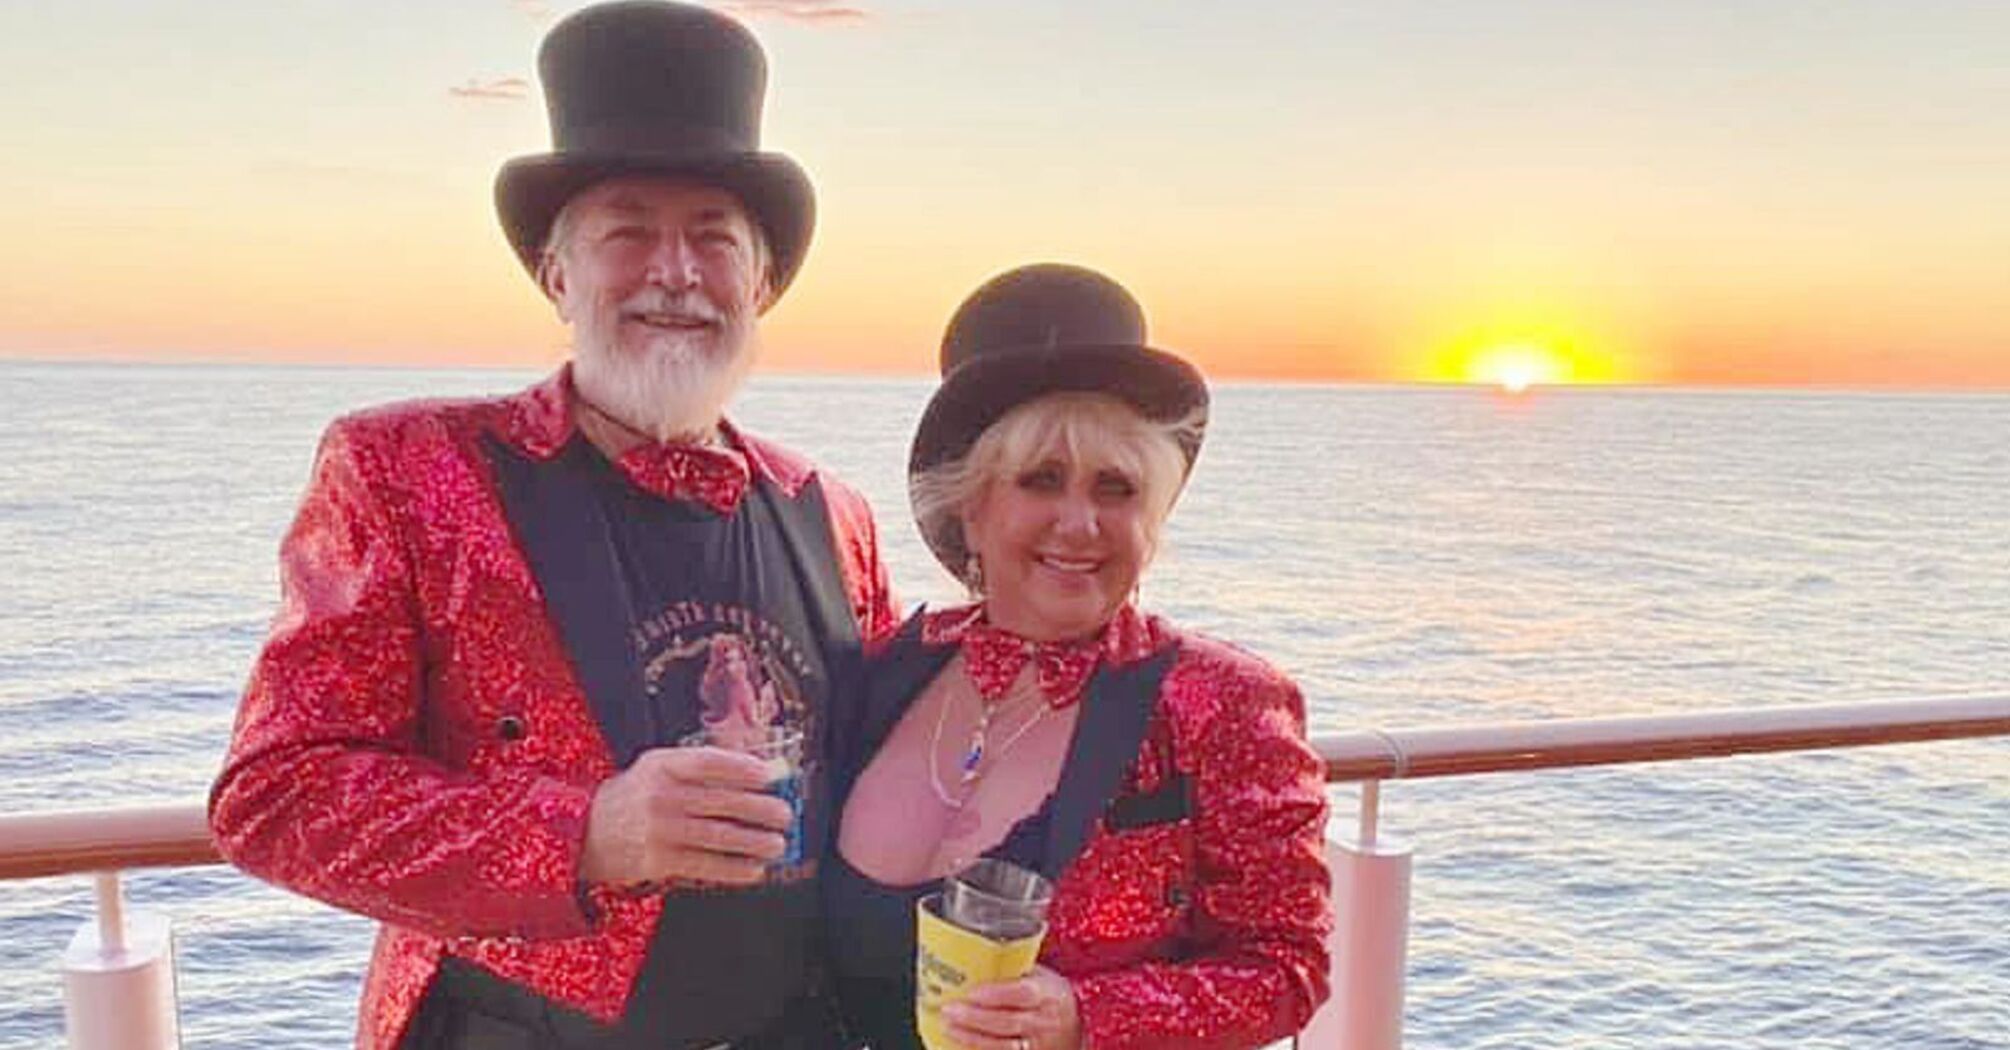 A couple from Florida sold all their property and went on a trip around the world